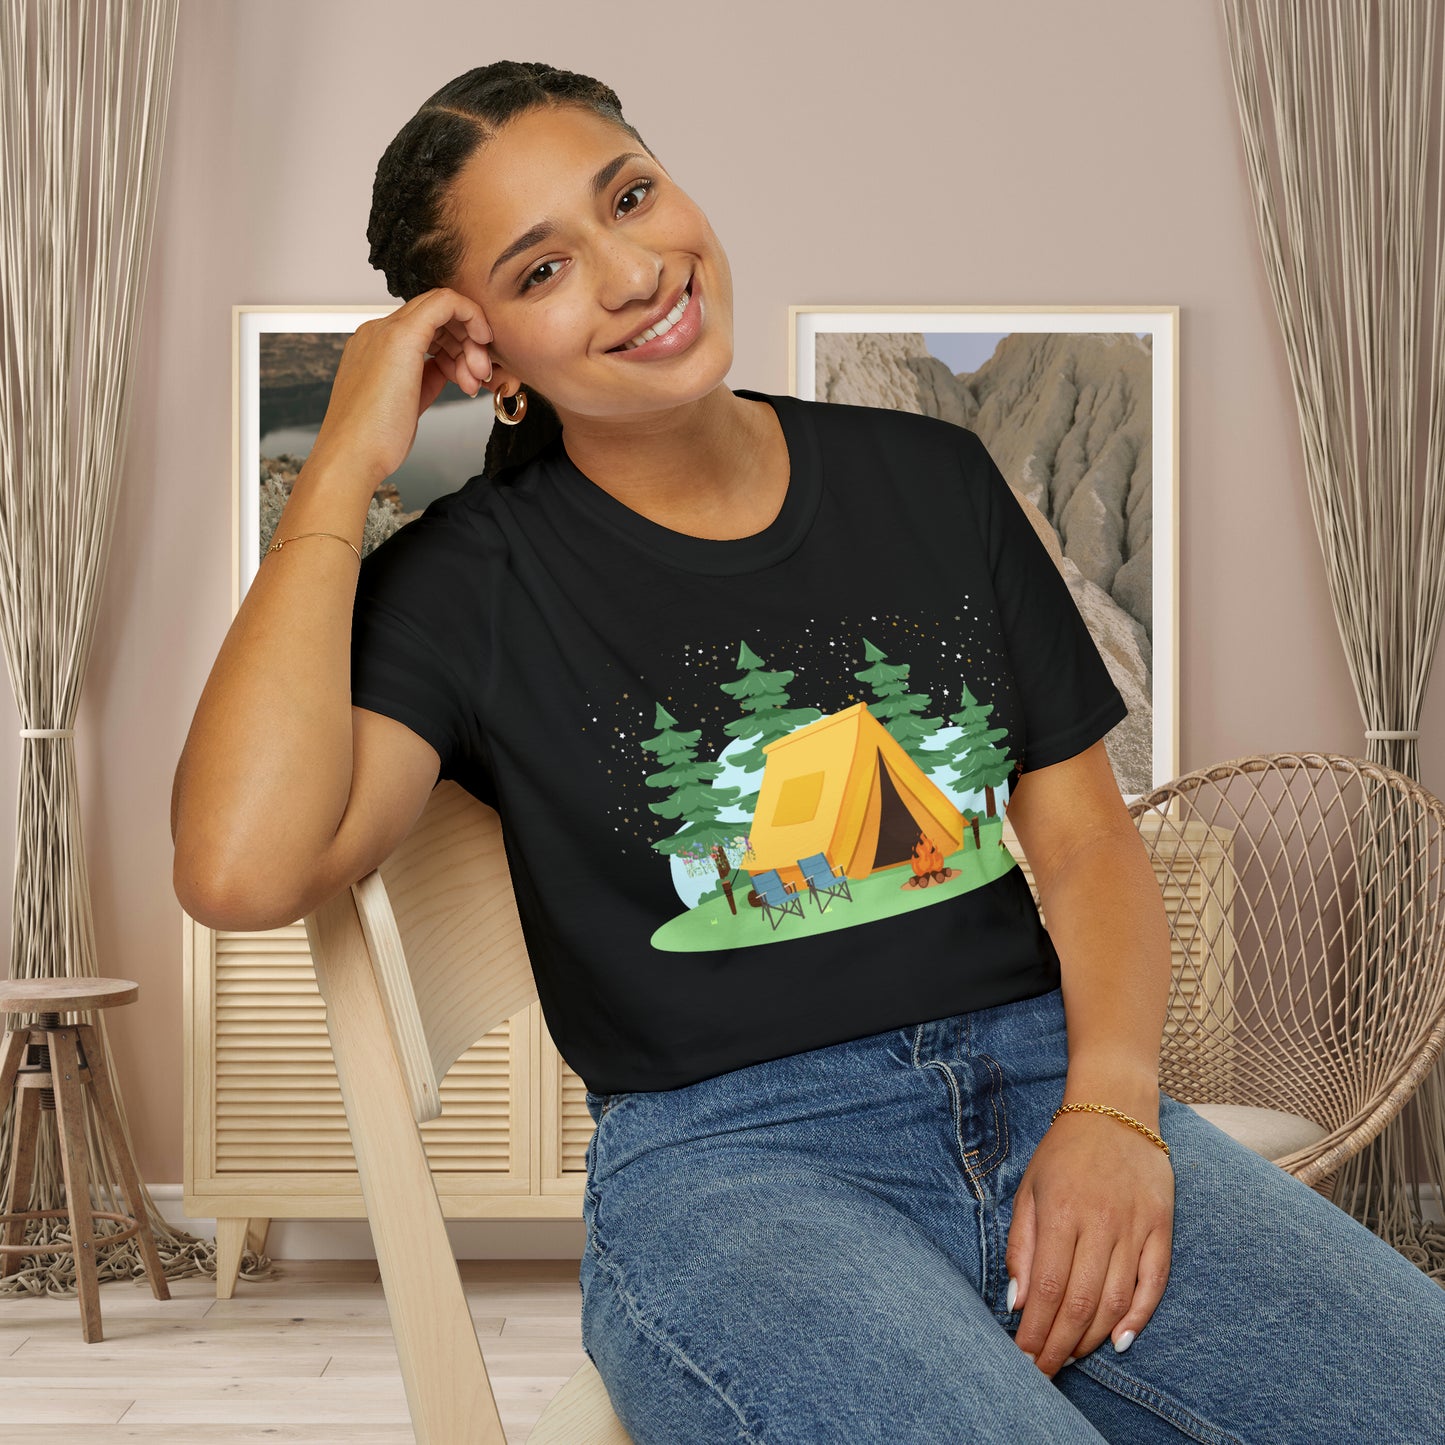 Camping can be so much fun! A happy place for many of us. Love of the great outdoors inspired design on this Unisex Softstyle T-Shirt.